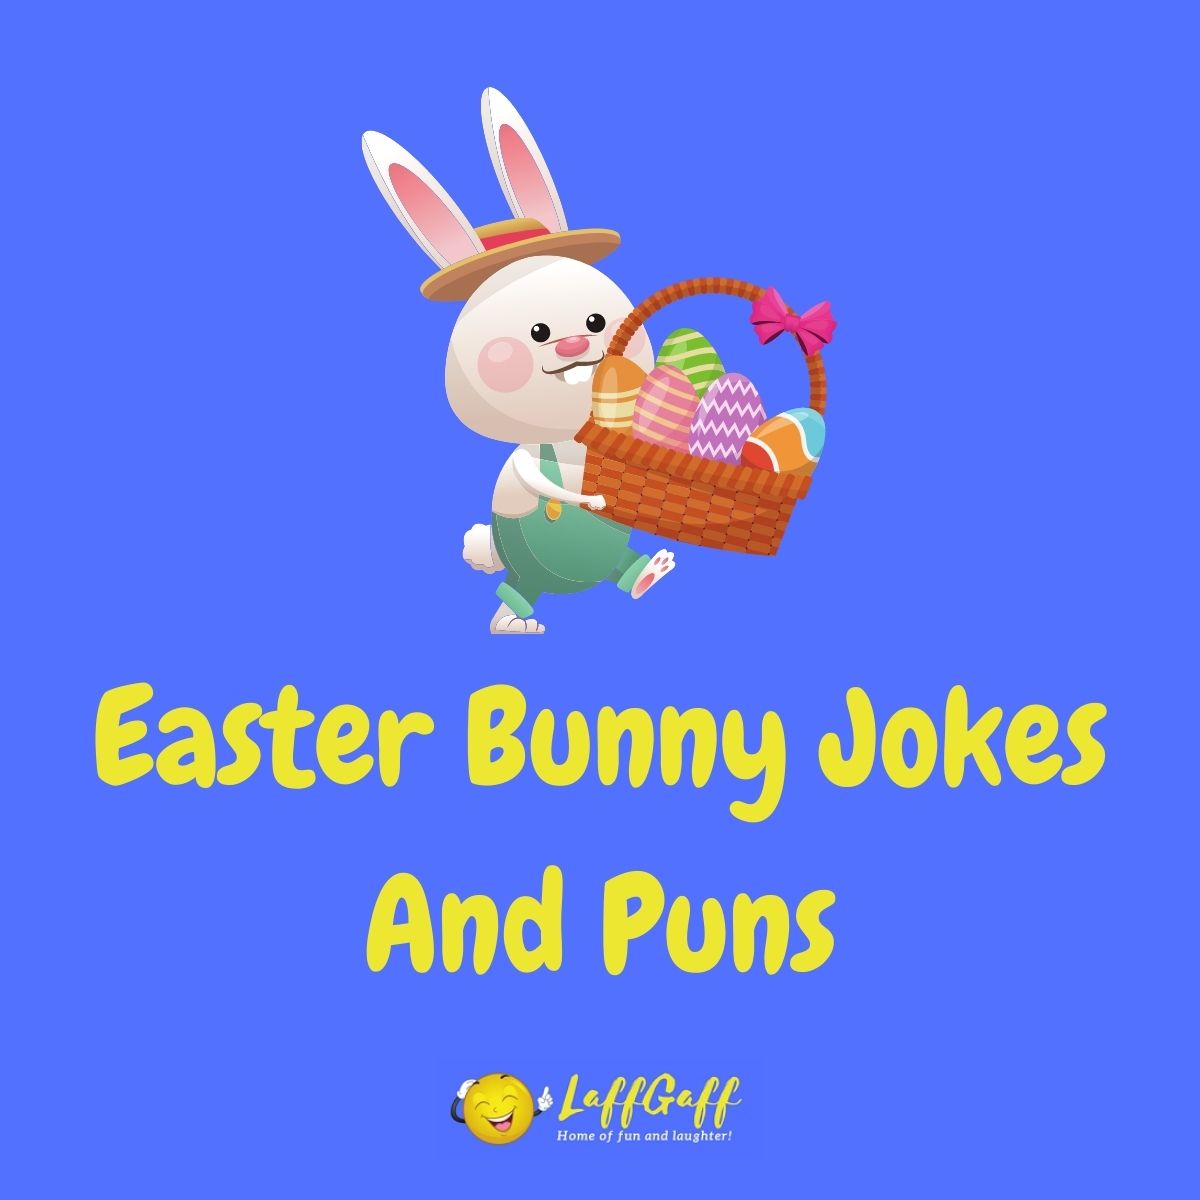 Featured image for a page of funny Easter Bunny jokes and puns.